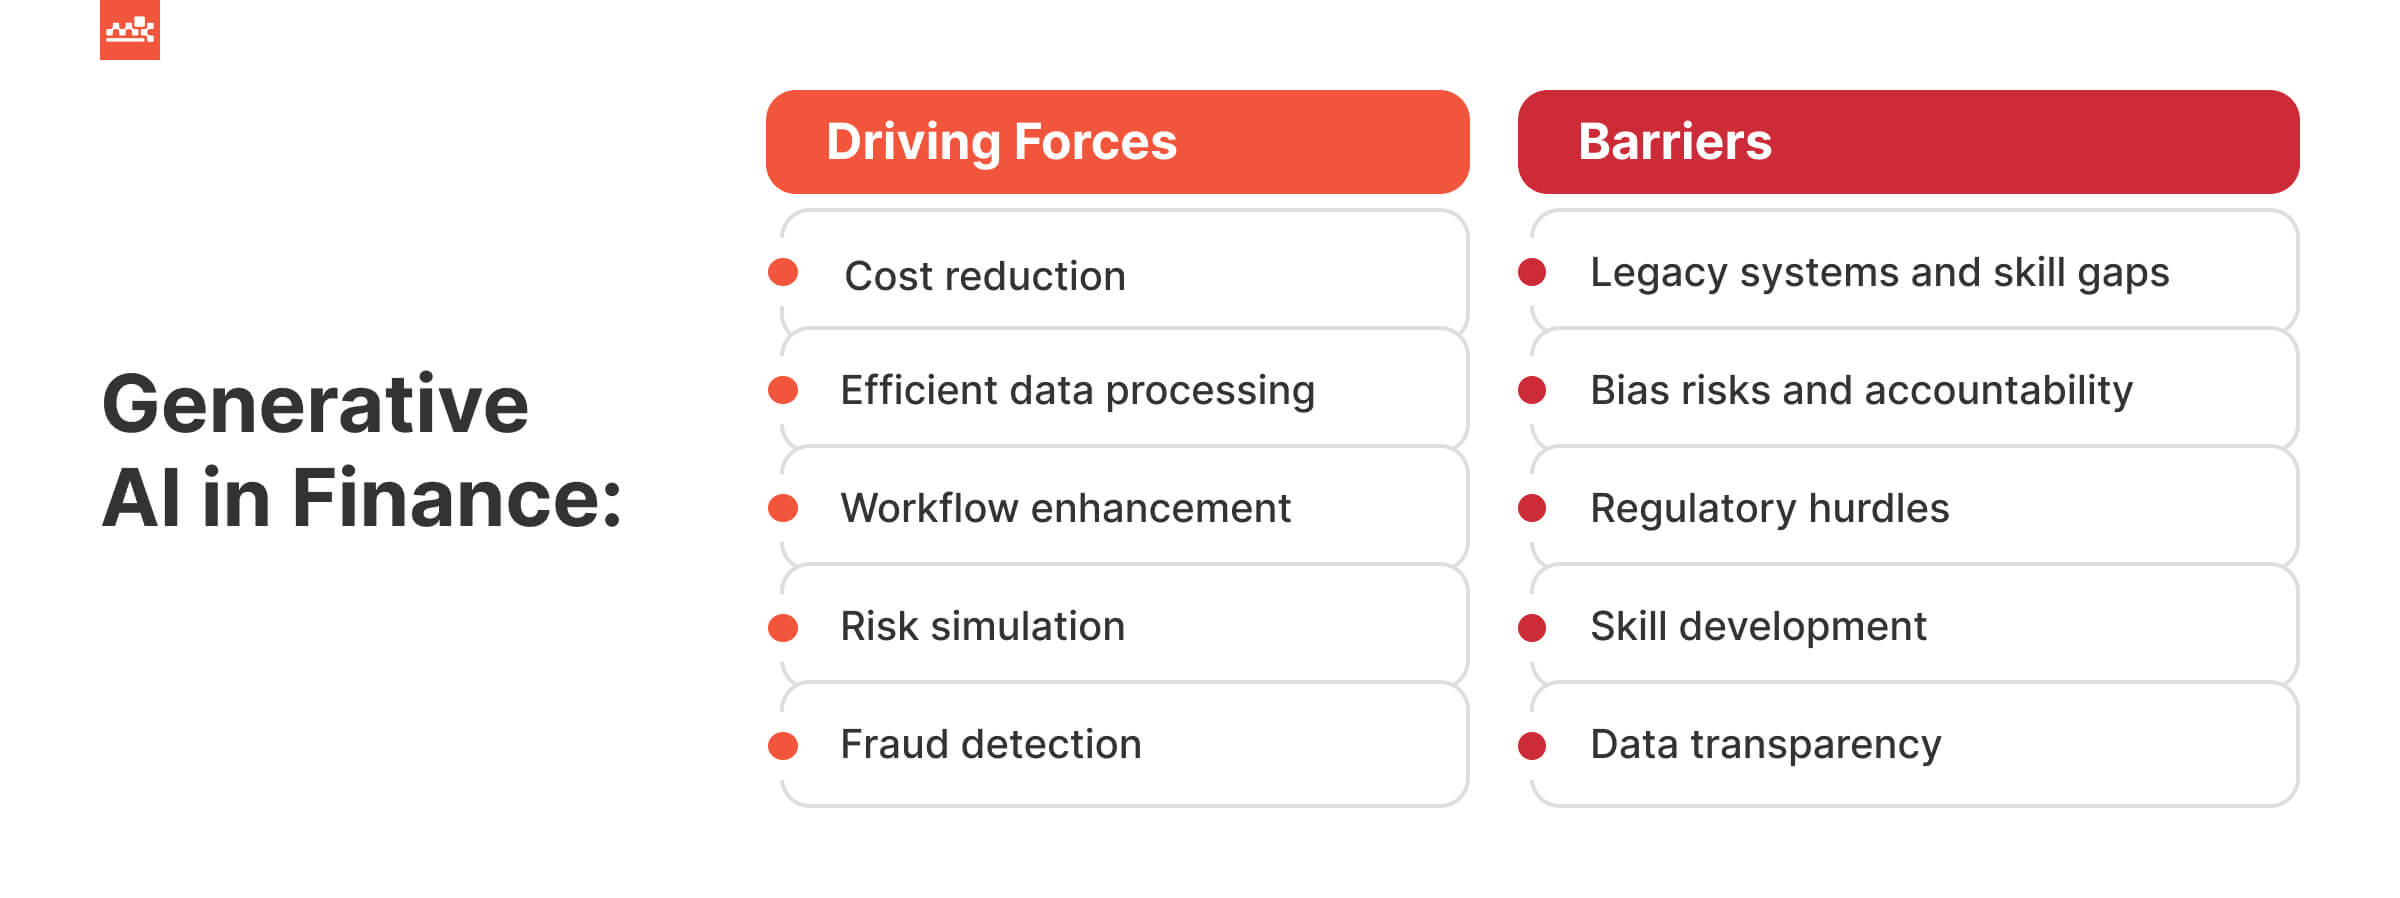 Gen AI in Finance - driving forces vs barriers